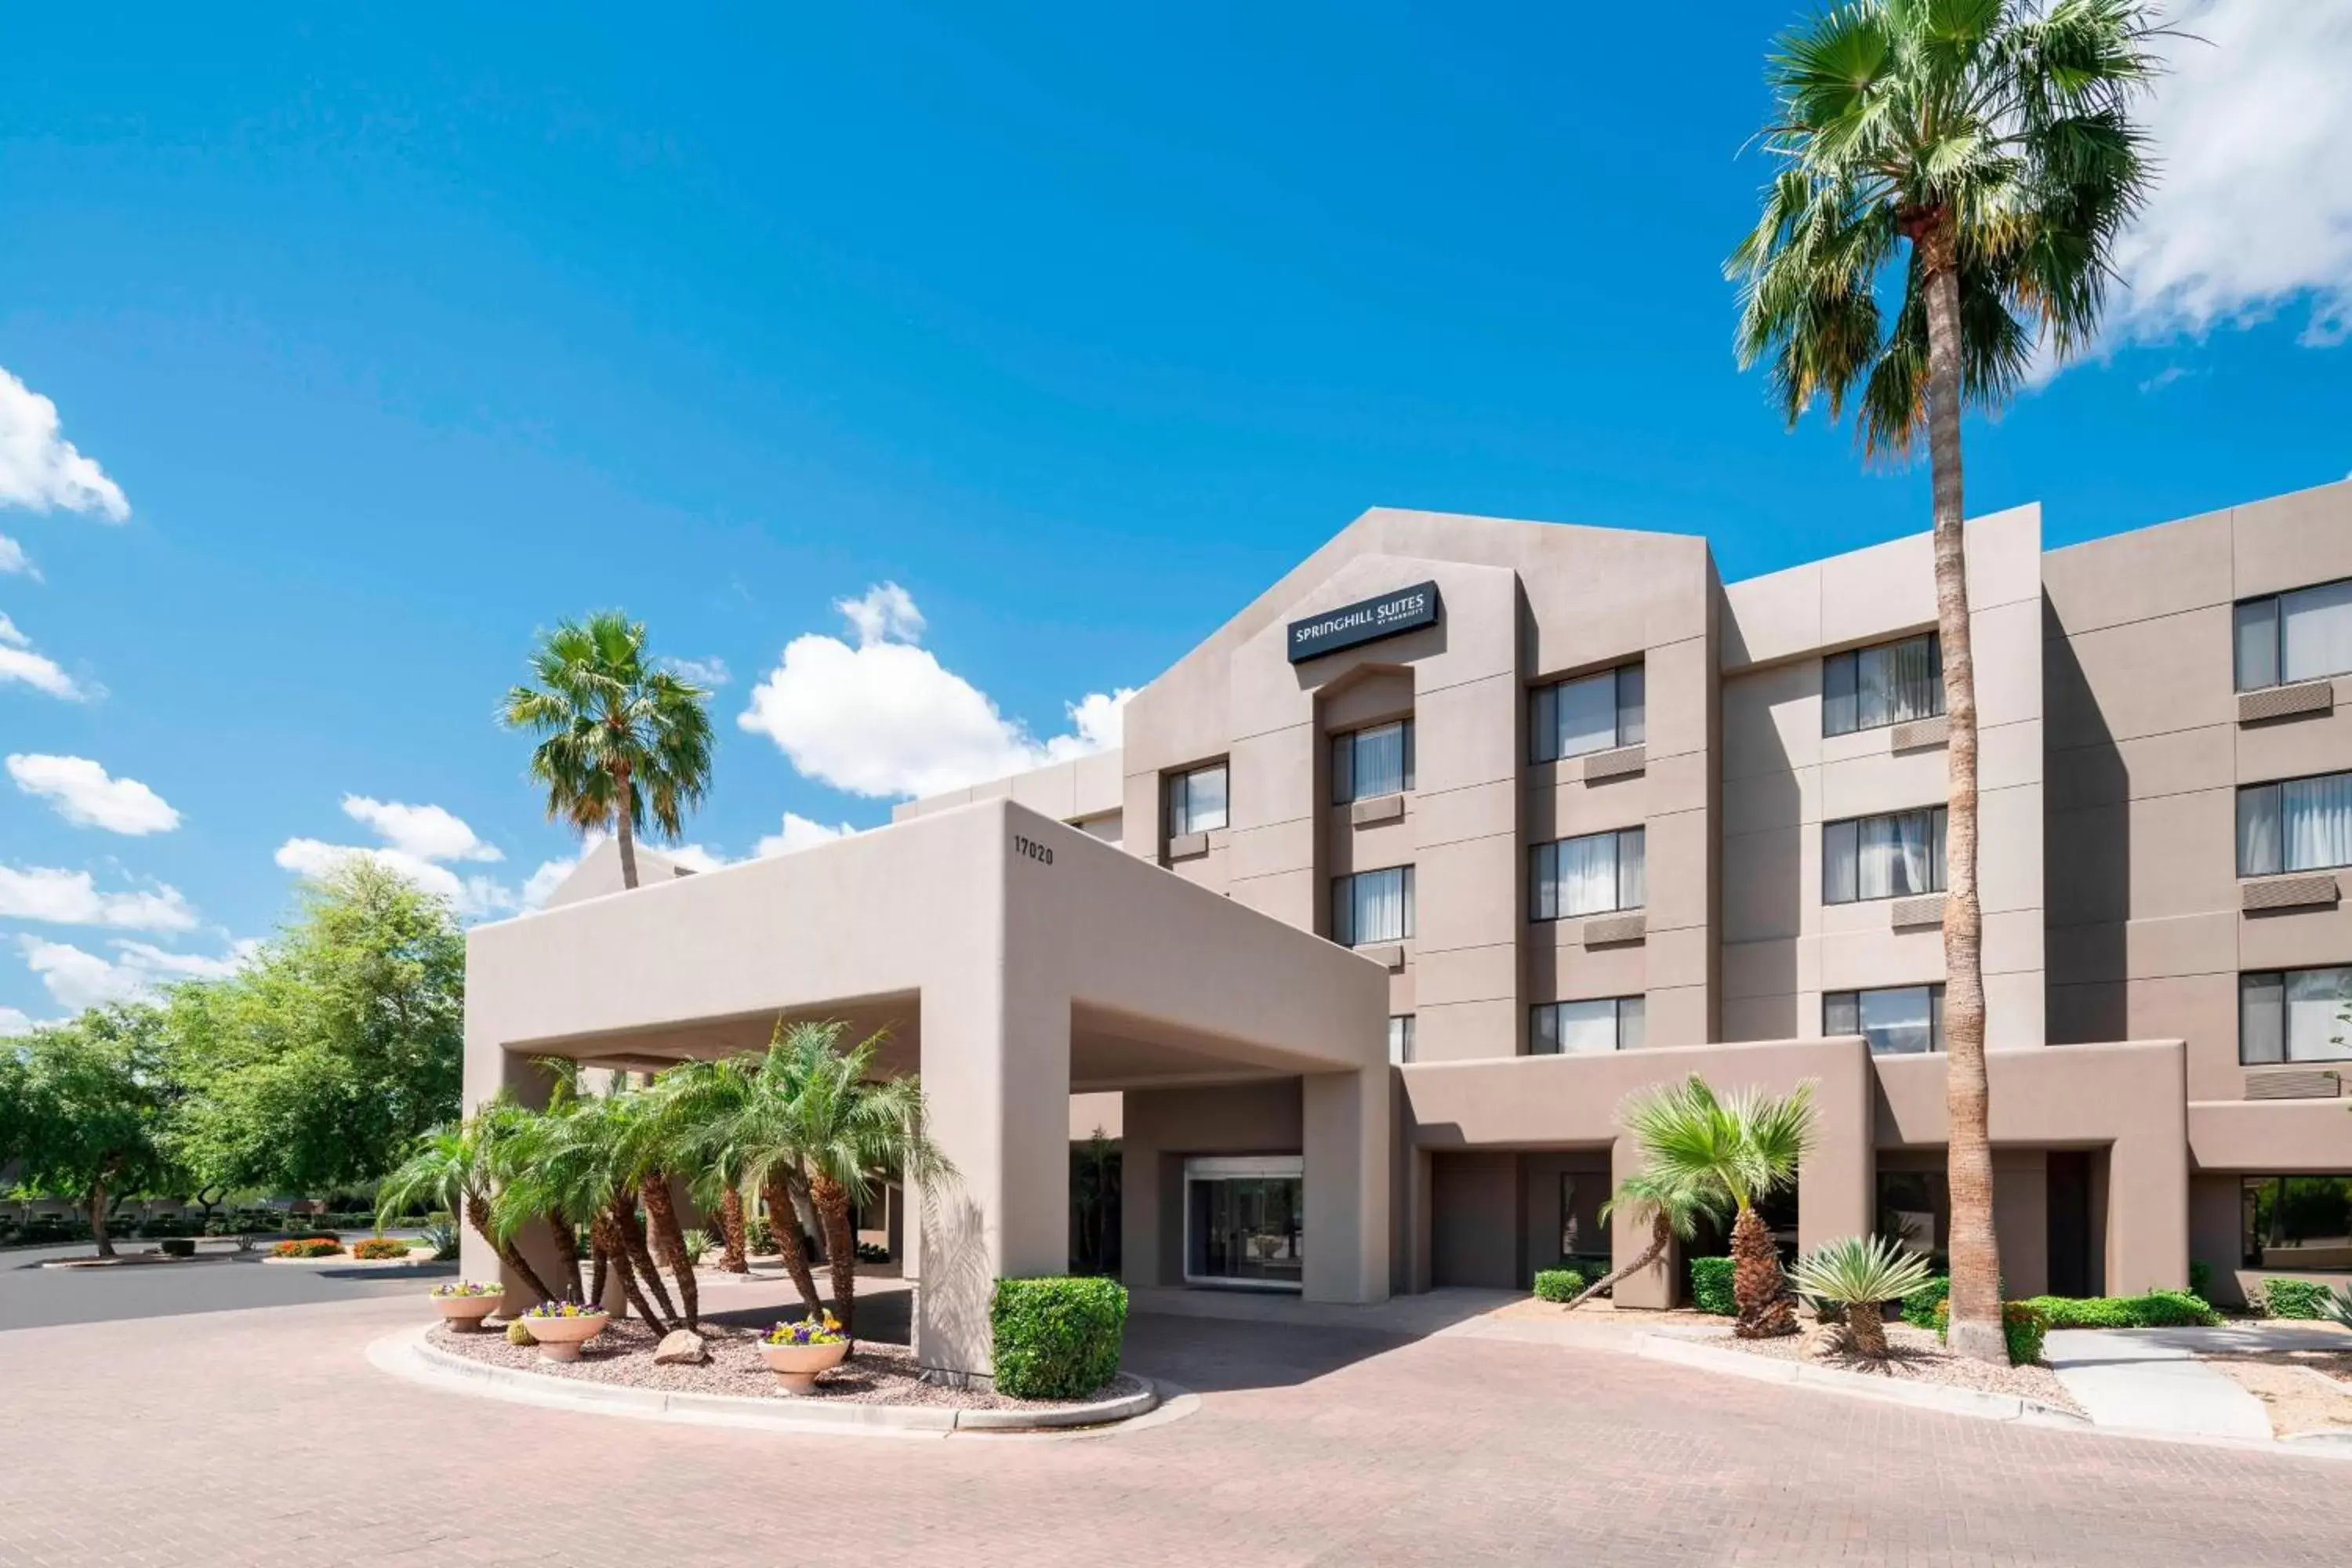 Property Building in SpringHill Suites Scottsdale North